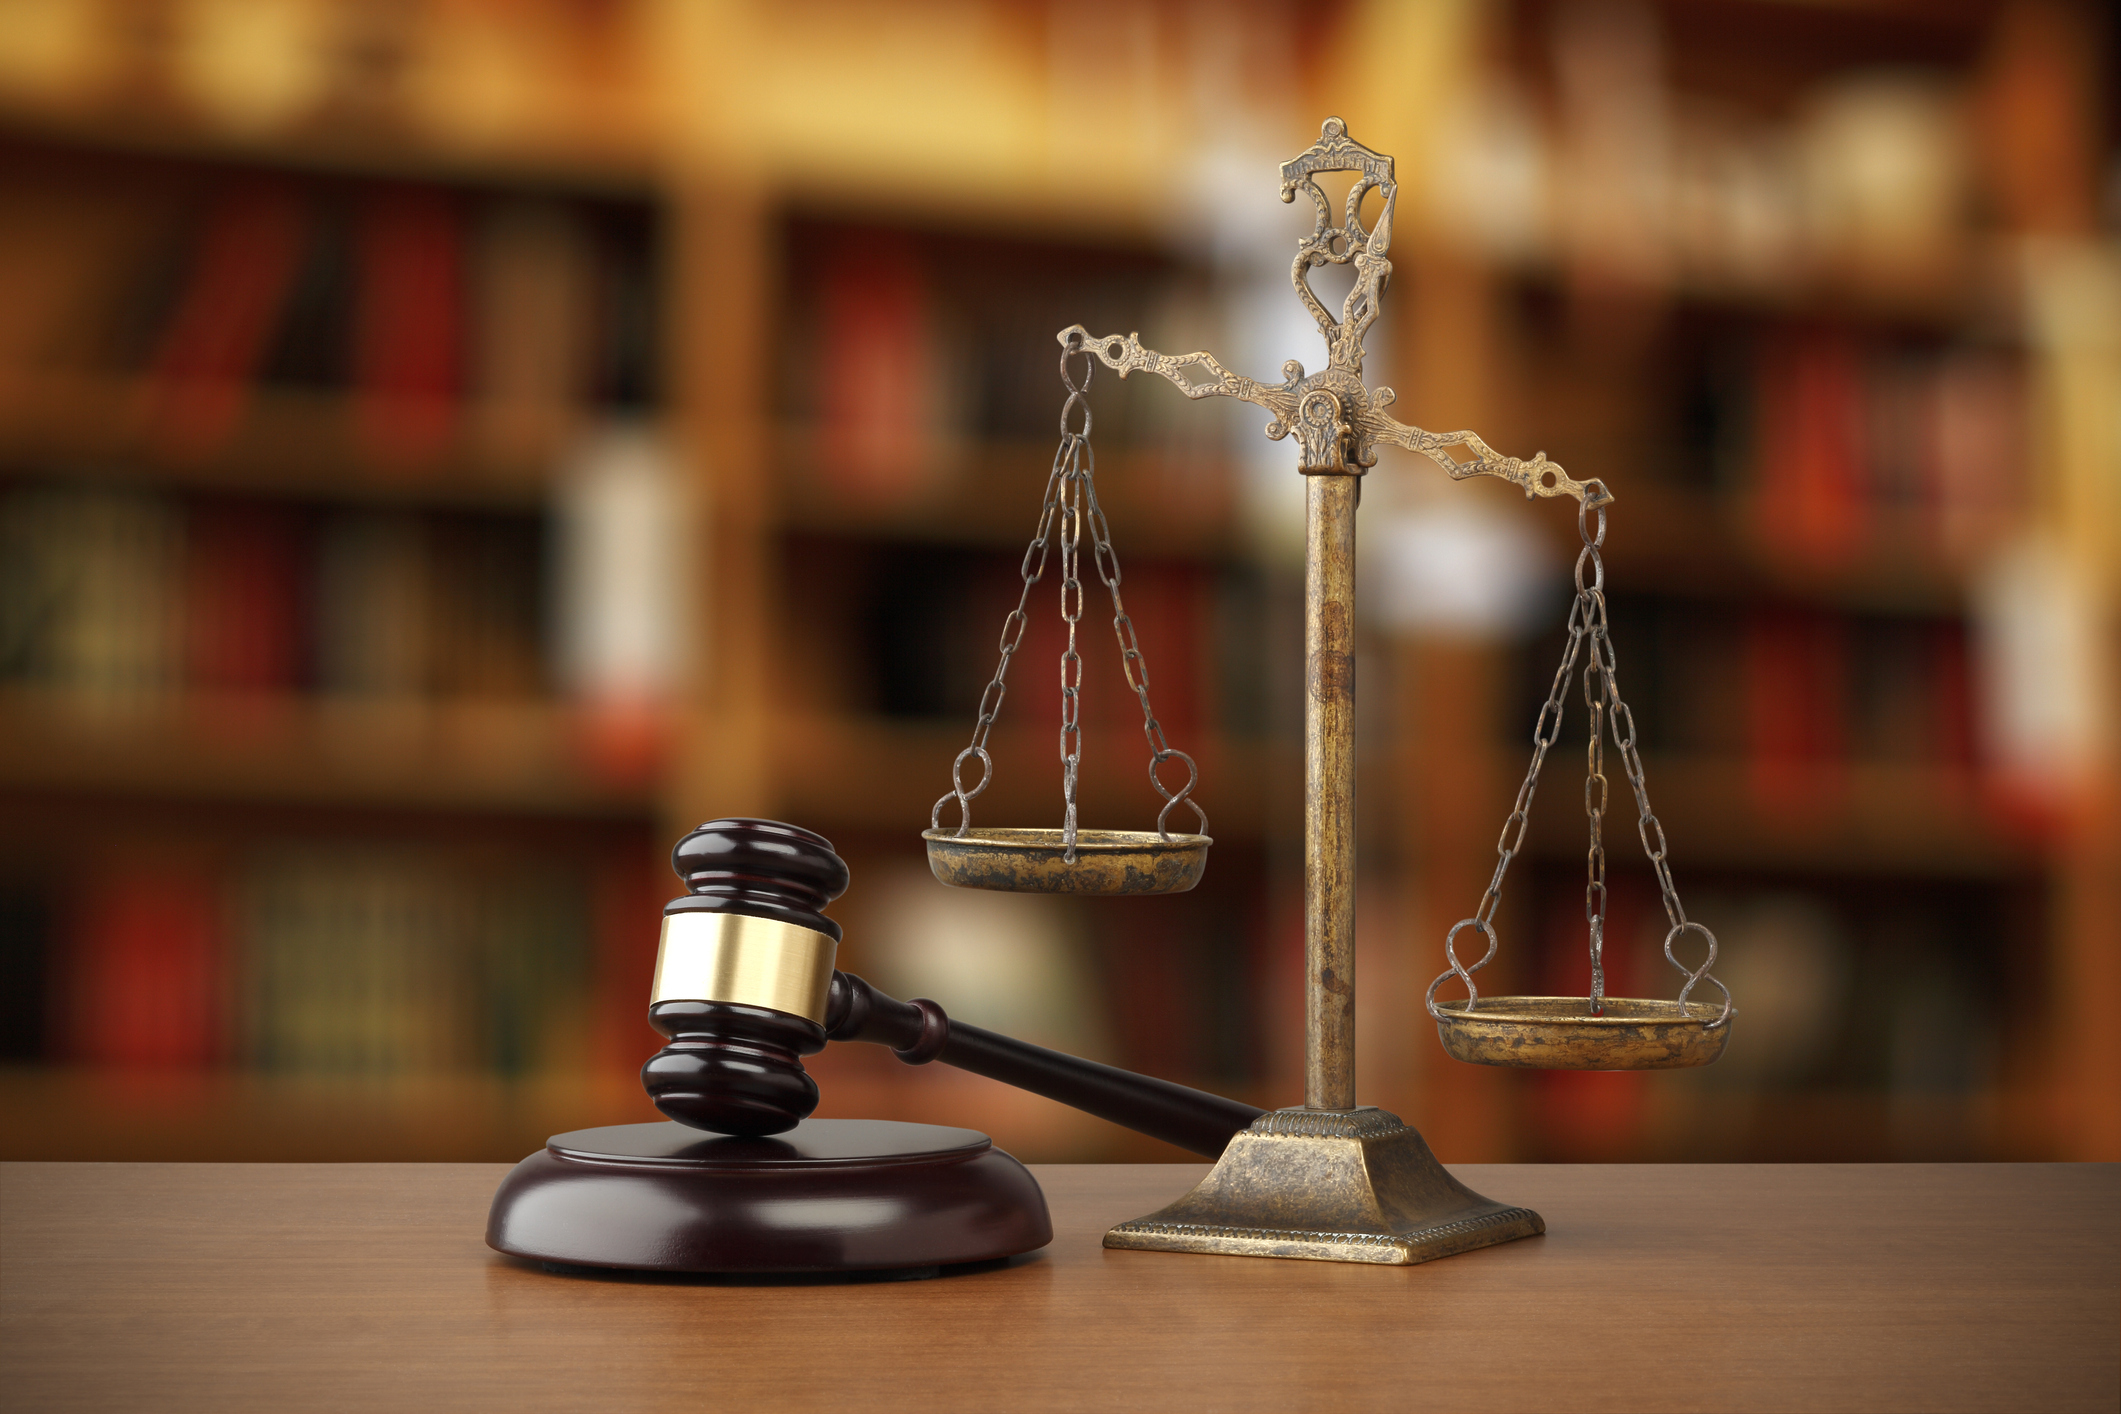 Photo of a gavel and scales of justice.